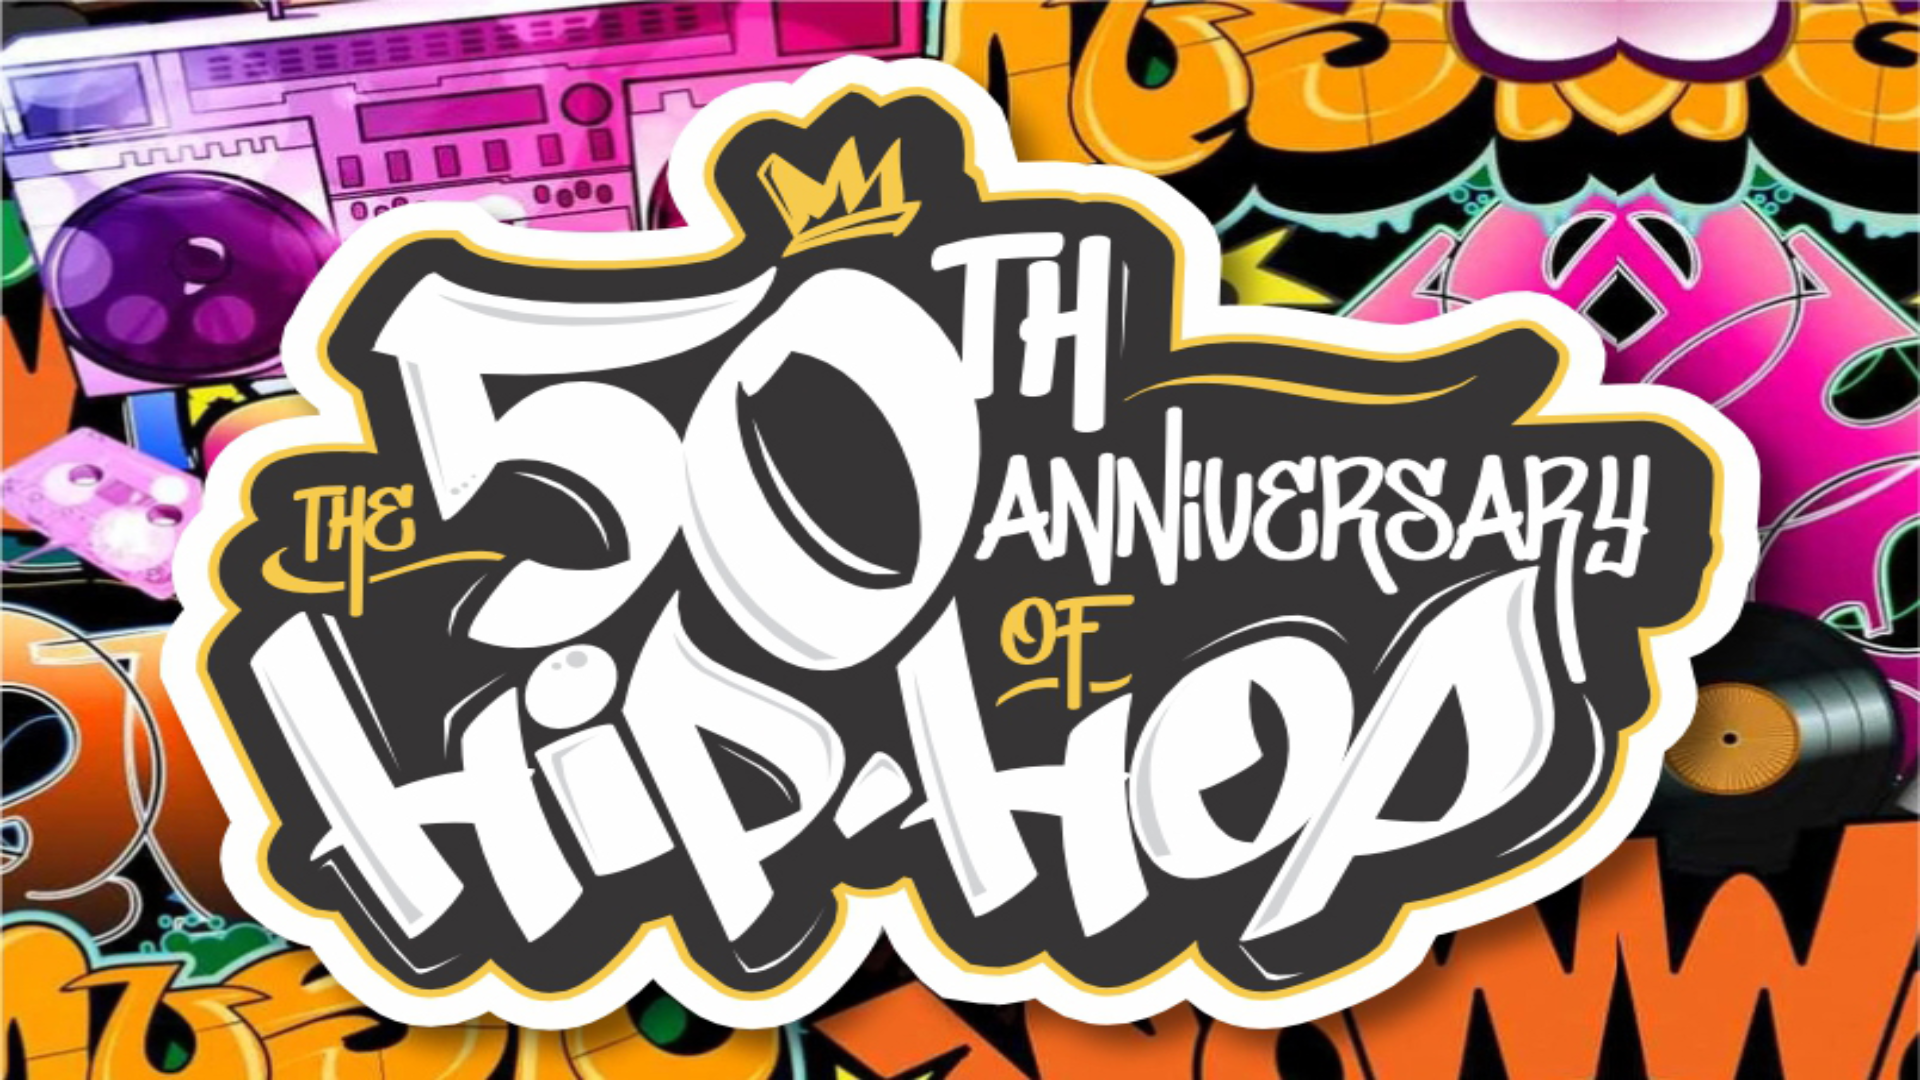 The Brand Liaison Celebrates the 50th Anniversary of HipHop License